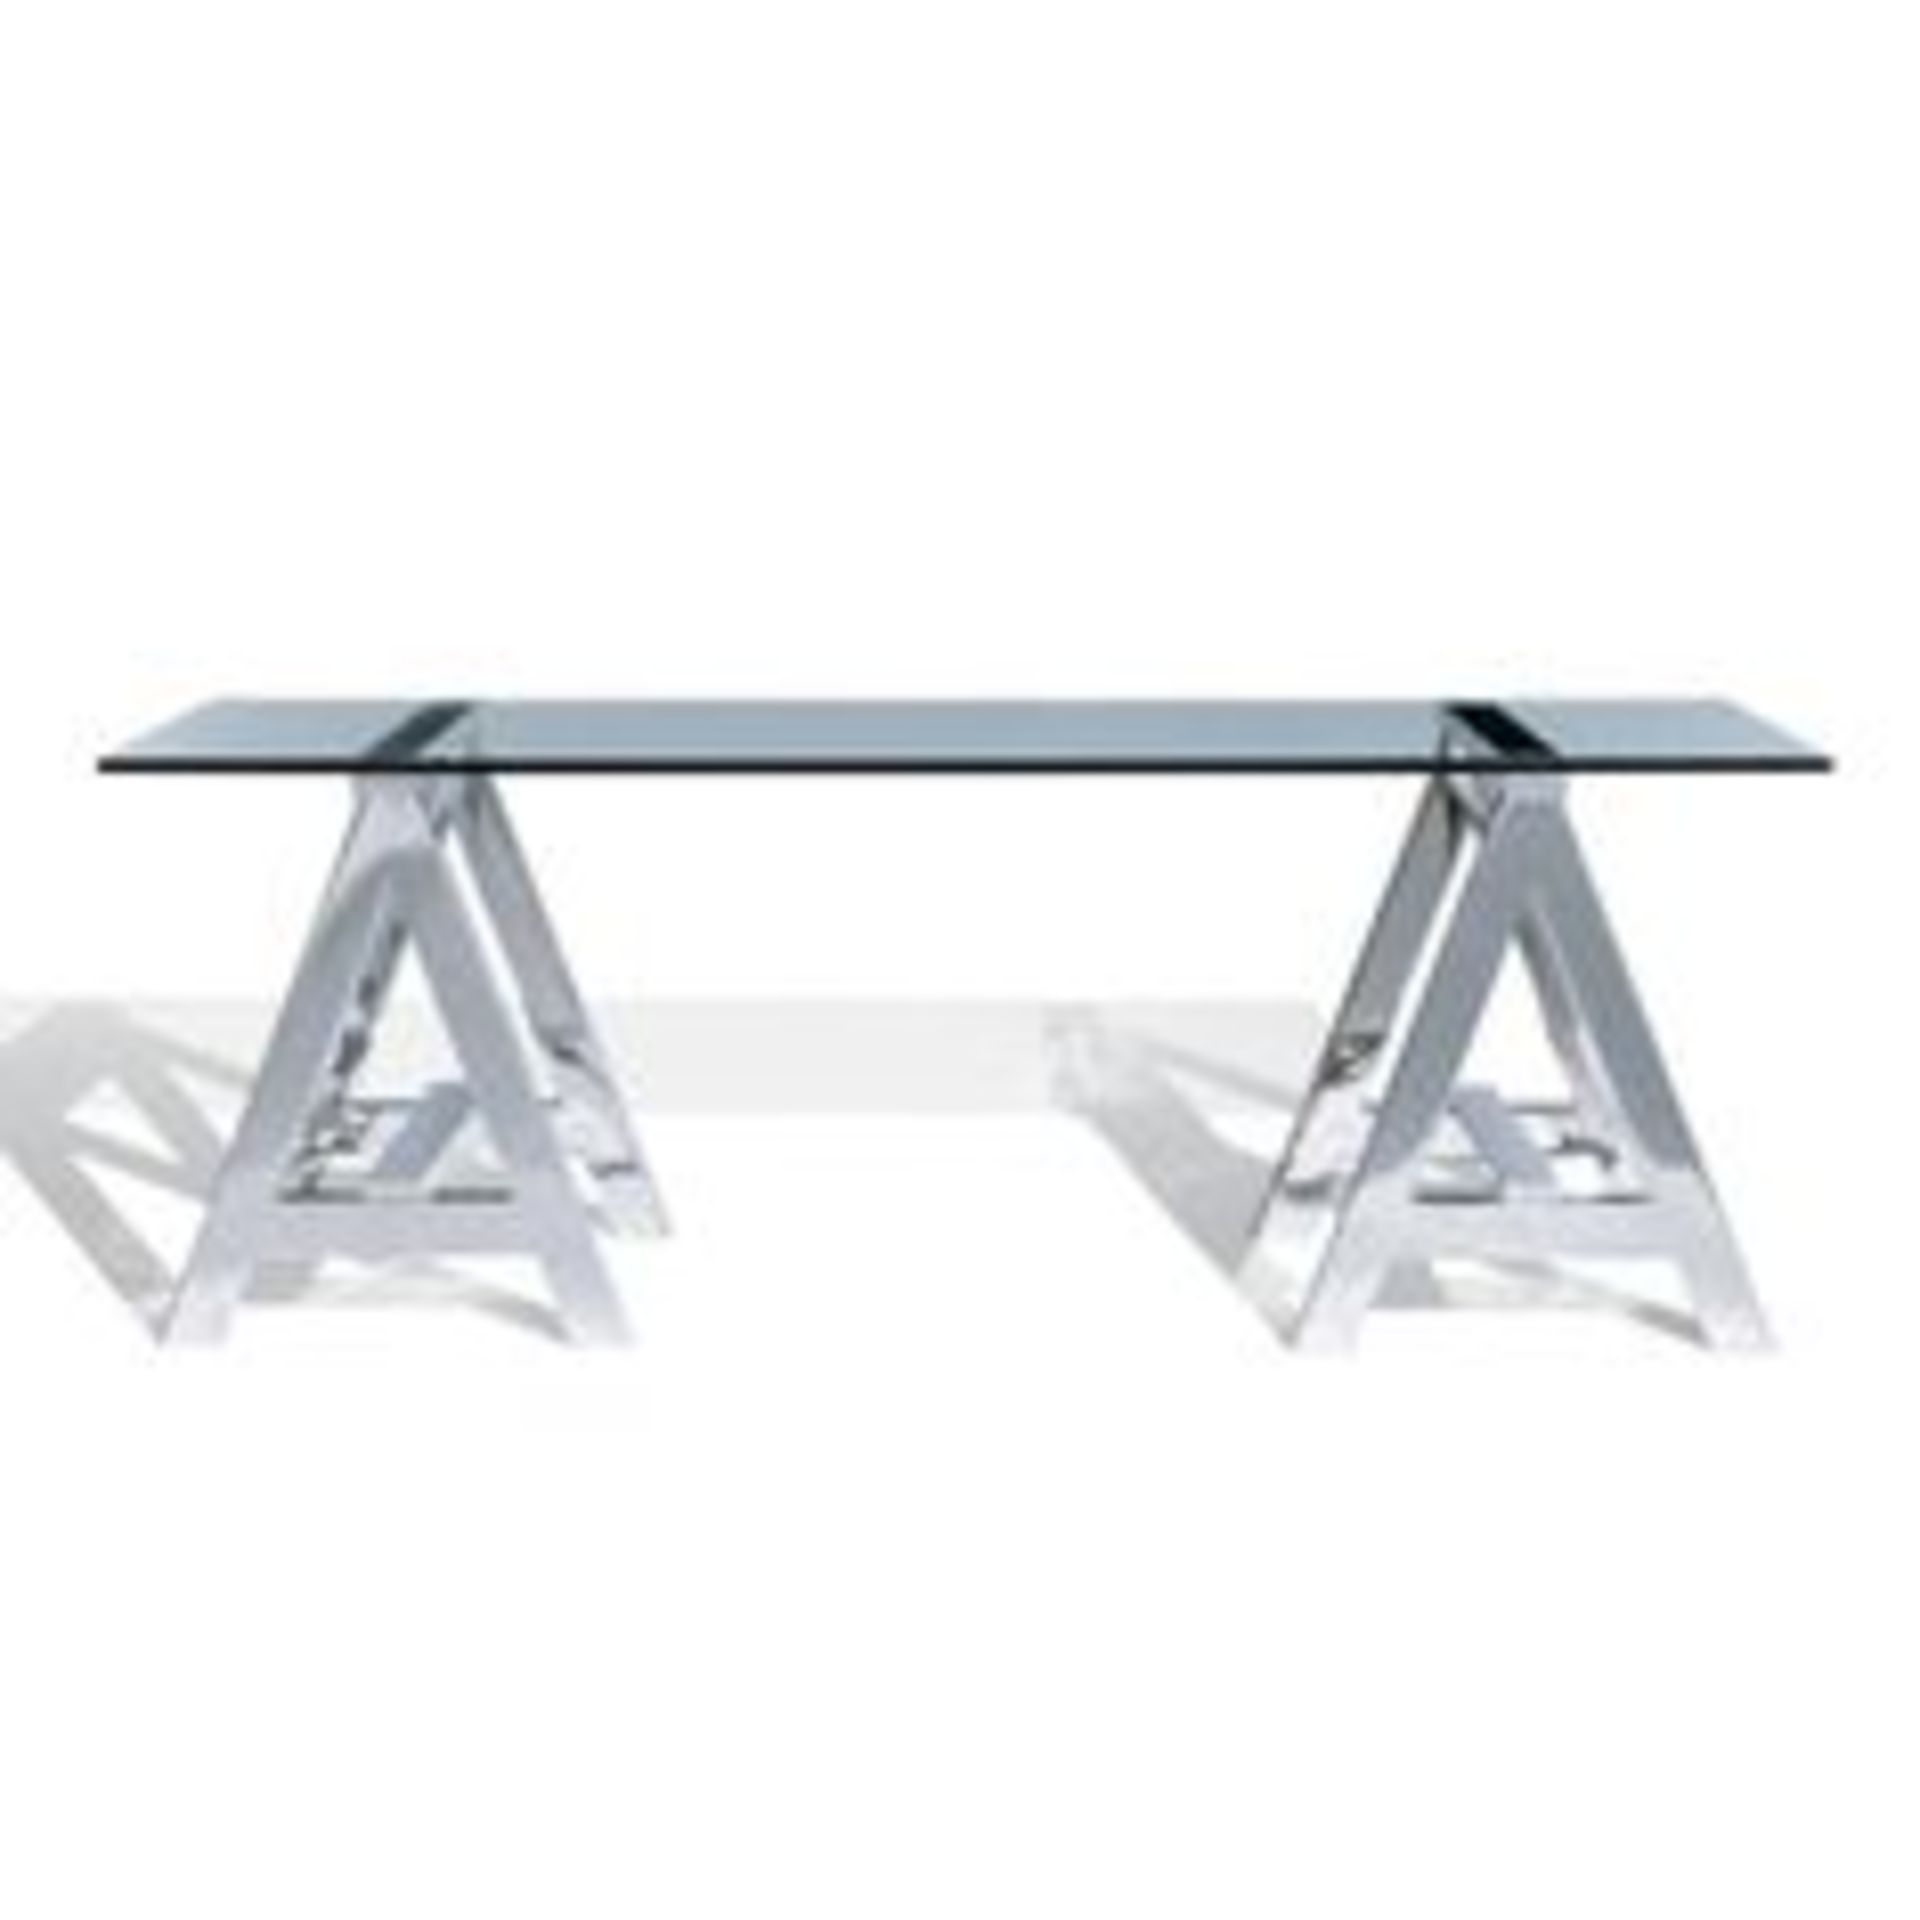 Crystalline Arris Console 183cm-Sleek Glass Acrylic With Exceptional Clarity To Accentuate The - Image 2 of 3